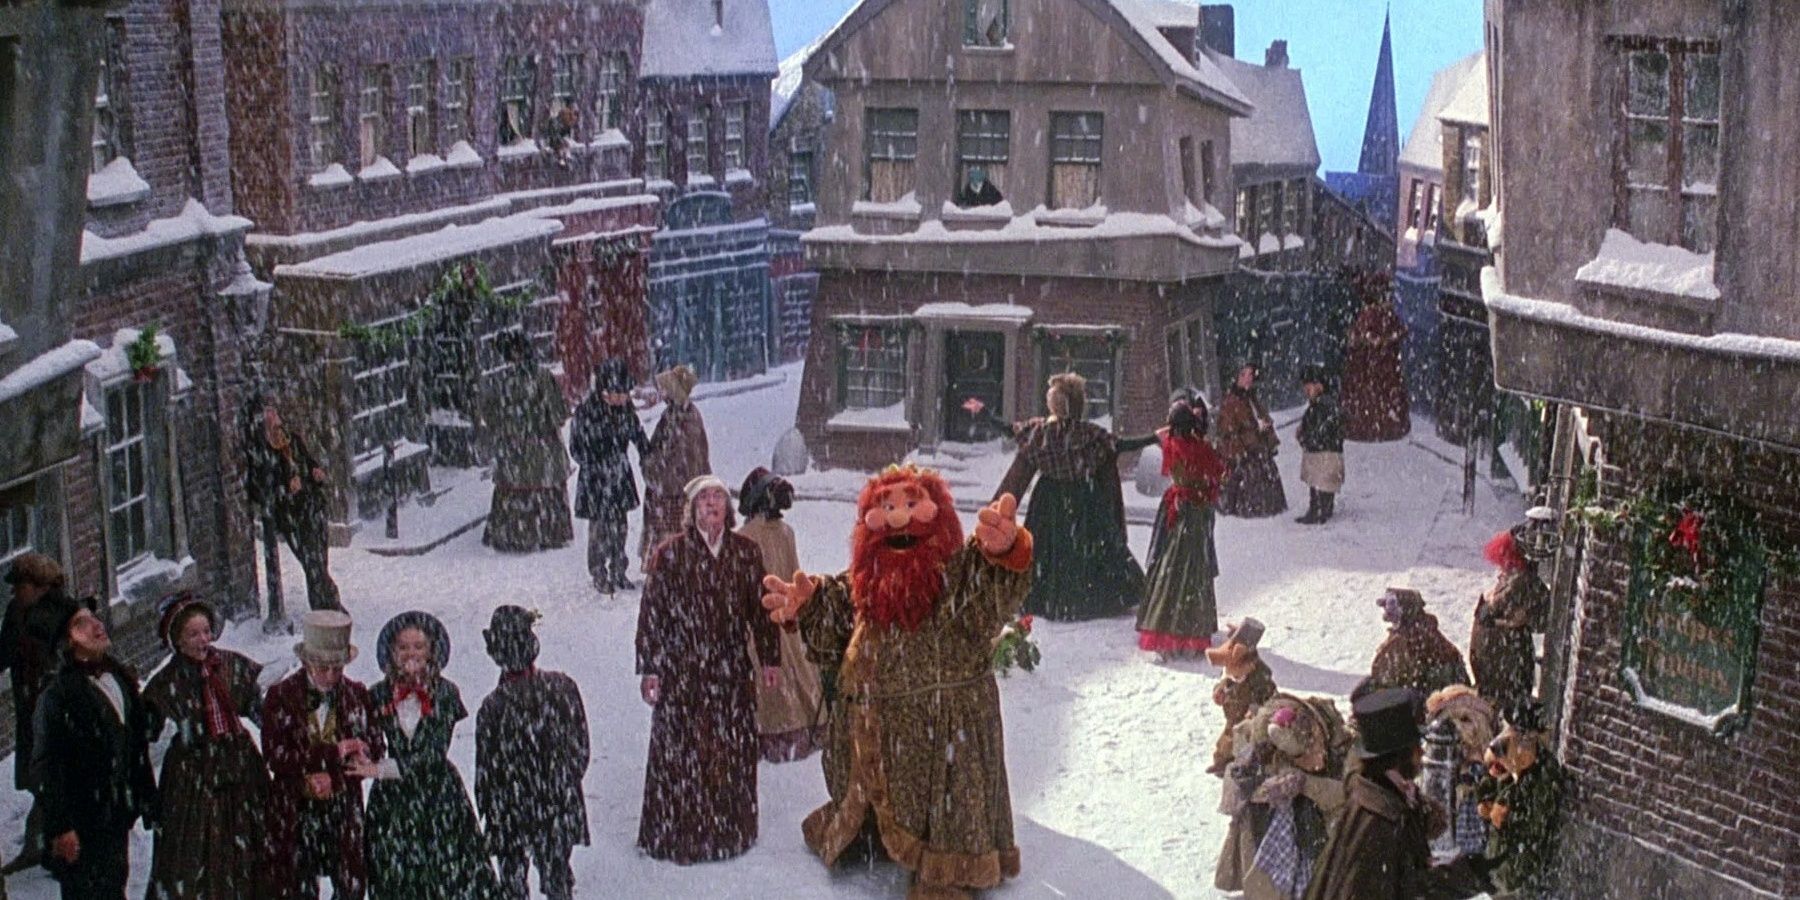 Scrooge and Christmas Present Singing in Muppet Christmas Carol